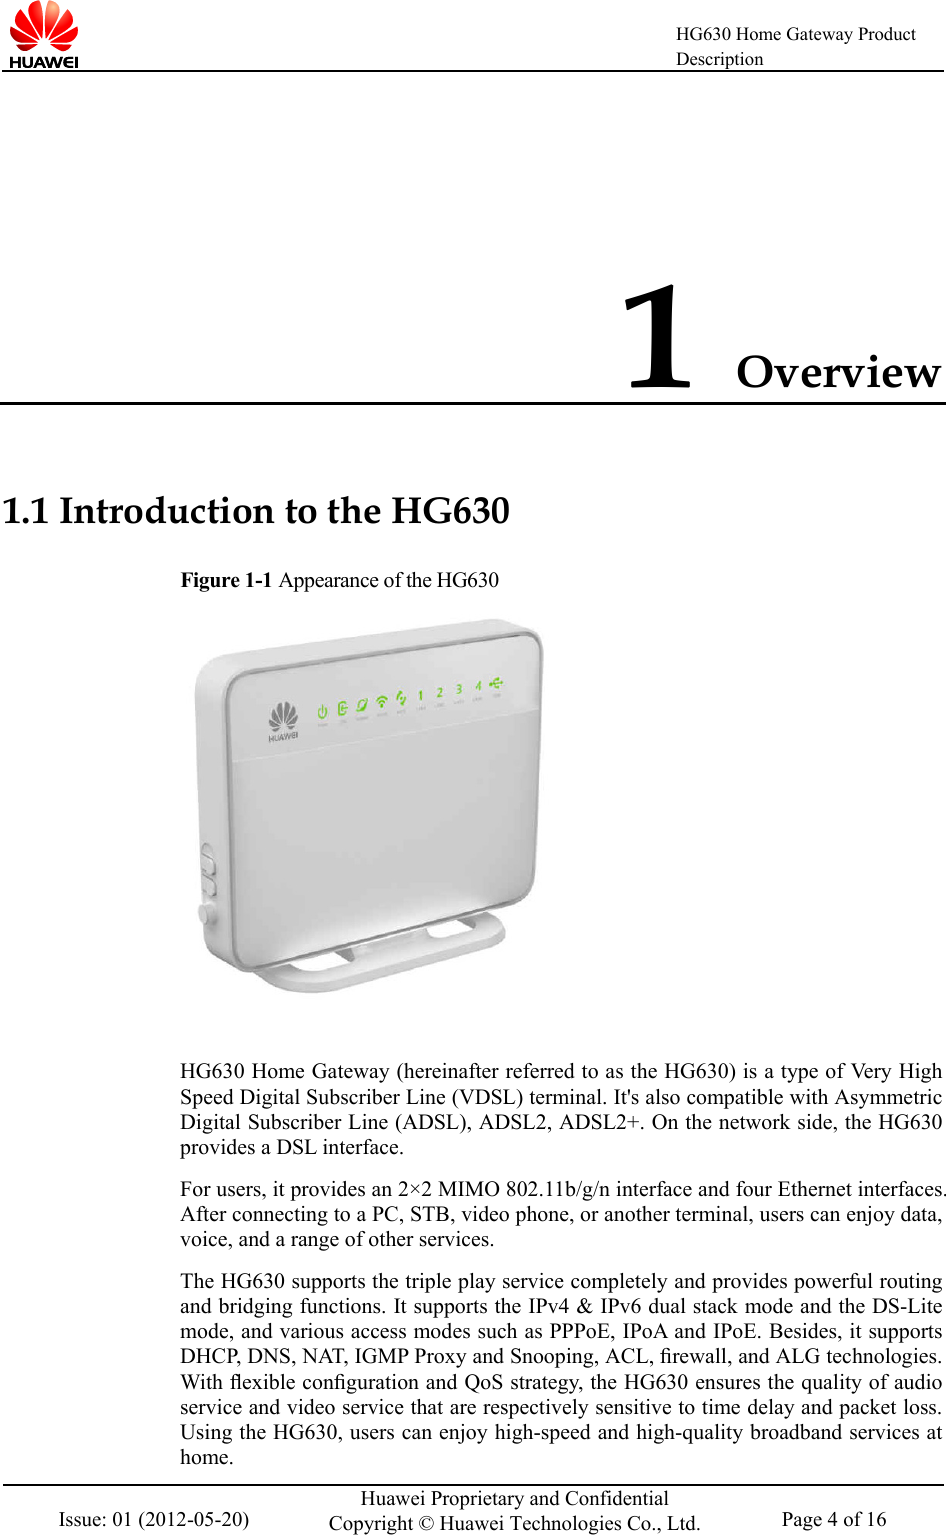    HG630 Home Gateway Product Description  Issue: 01 (2012-05-20) Huawei Proprietary and Confidential Copyright © Huawei Technologies Co., Ltd. Page 4 of 16  1 Overview 1.1 Introduction to the HG630 Figure 1-1 Appearance of the HG630   HG630 Home Gateway (hereinafter referred to as the HG630) is a type of Very High Speed Digital Subscriber Line (VDSL) terminal. It&apos;s also compatible with Asymmetric Digital Subscriber Line (ADSL), ADSL2, ADSL2+. On the network side, the HG630 provides a DSL interface. For users, it provides an 2×2 MIMO 802.11b/g/n interface and four Ethernet interfaces. After connecting to a PC, STB, video phone, or another terminal, users can enjoy data, voice, and a range of other services.   The HG630 supports the triple play service completely and provides powerful routing and bridging functions. It supports the IPv4 &amp; IPv6 dual stack mode and the DS-Lite mode, and various access modes such as PPPoE, IPoA and IPoE. Besides, it supports DHCP, DNS, NAT, IGMP Proxy and Snooping, ACL, ﬁrewall, and ALG technologies. With ﬂexible conﬁguration and QoS strategy, the HG630 ensures the quality of audio service and video service that are respectively sensitive to time delay and packet loss. Using the HG630, users can enjoy high-speed and high-quality broadband services at home. 